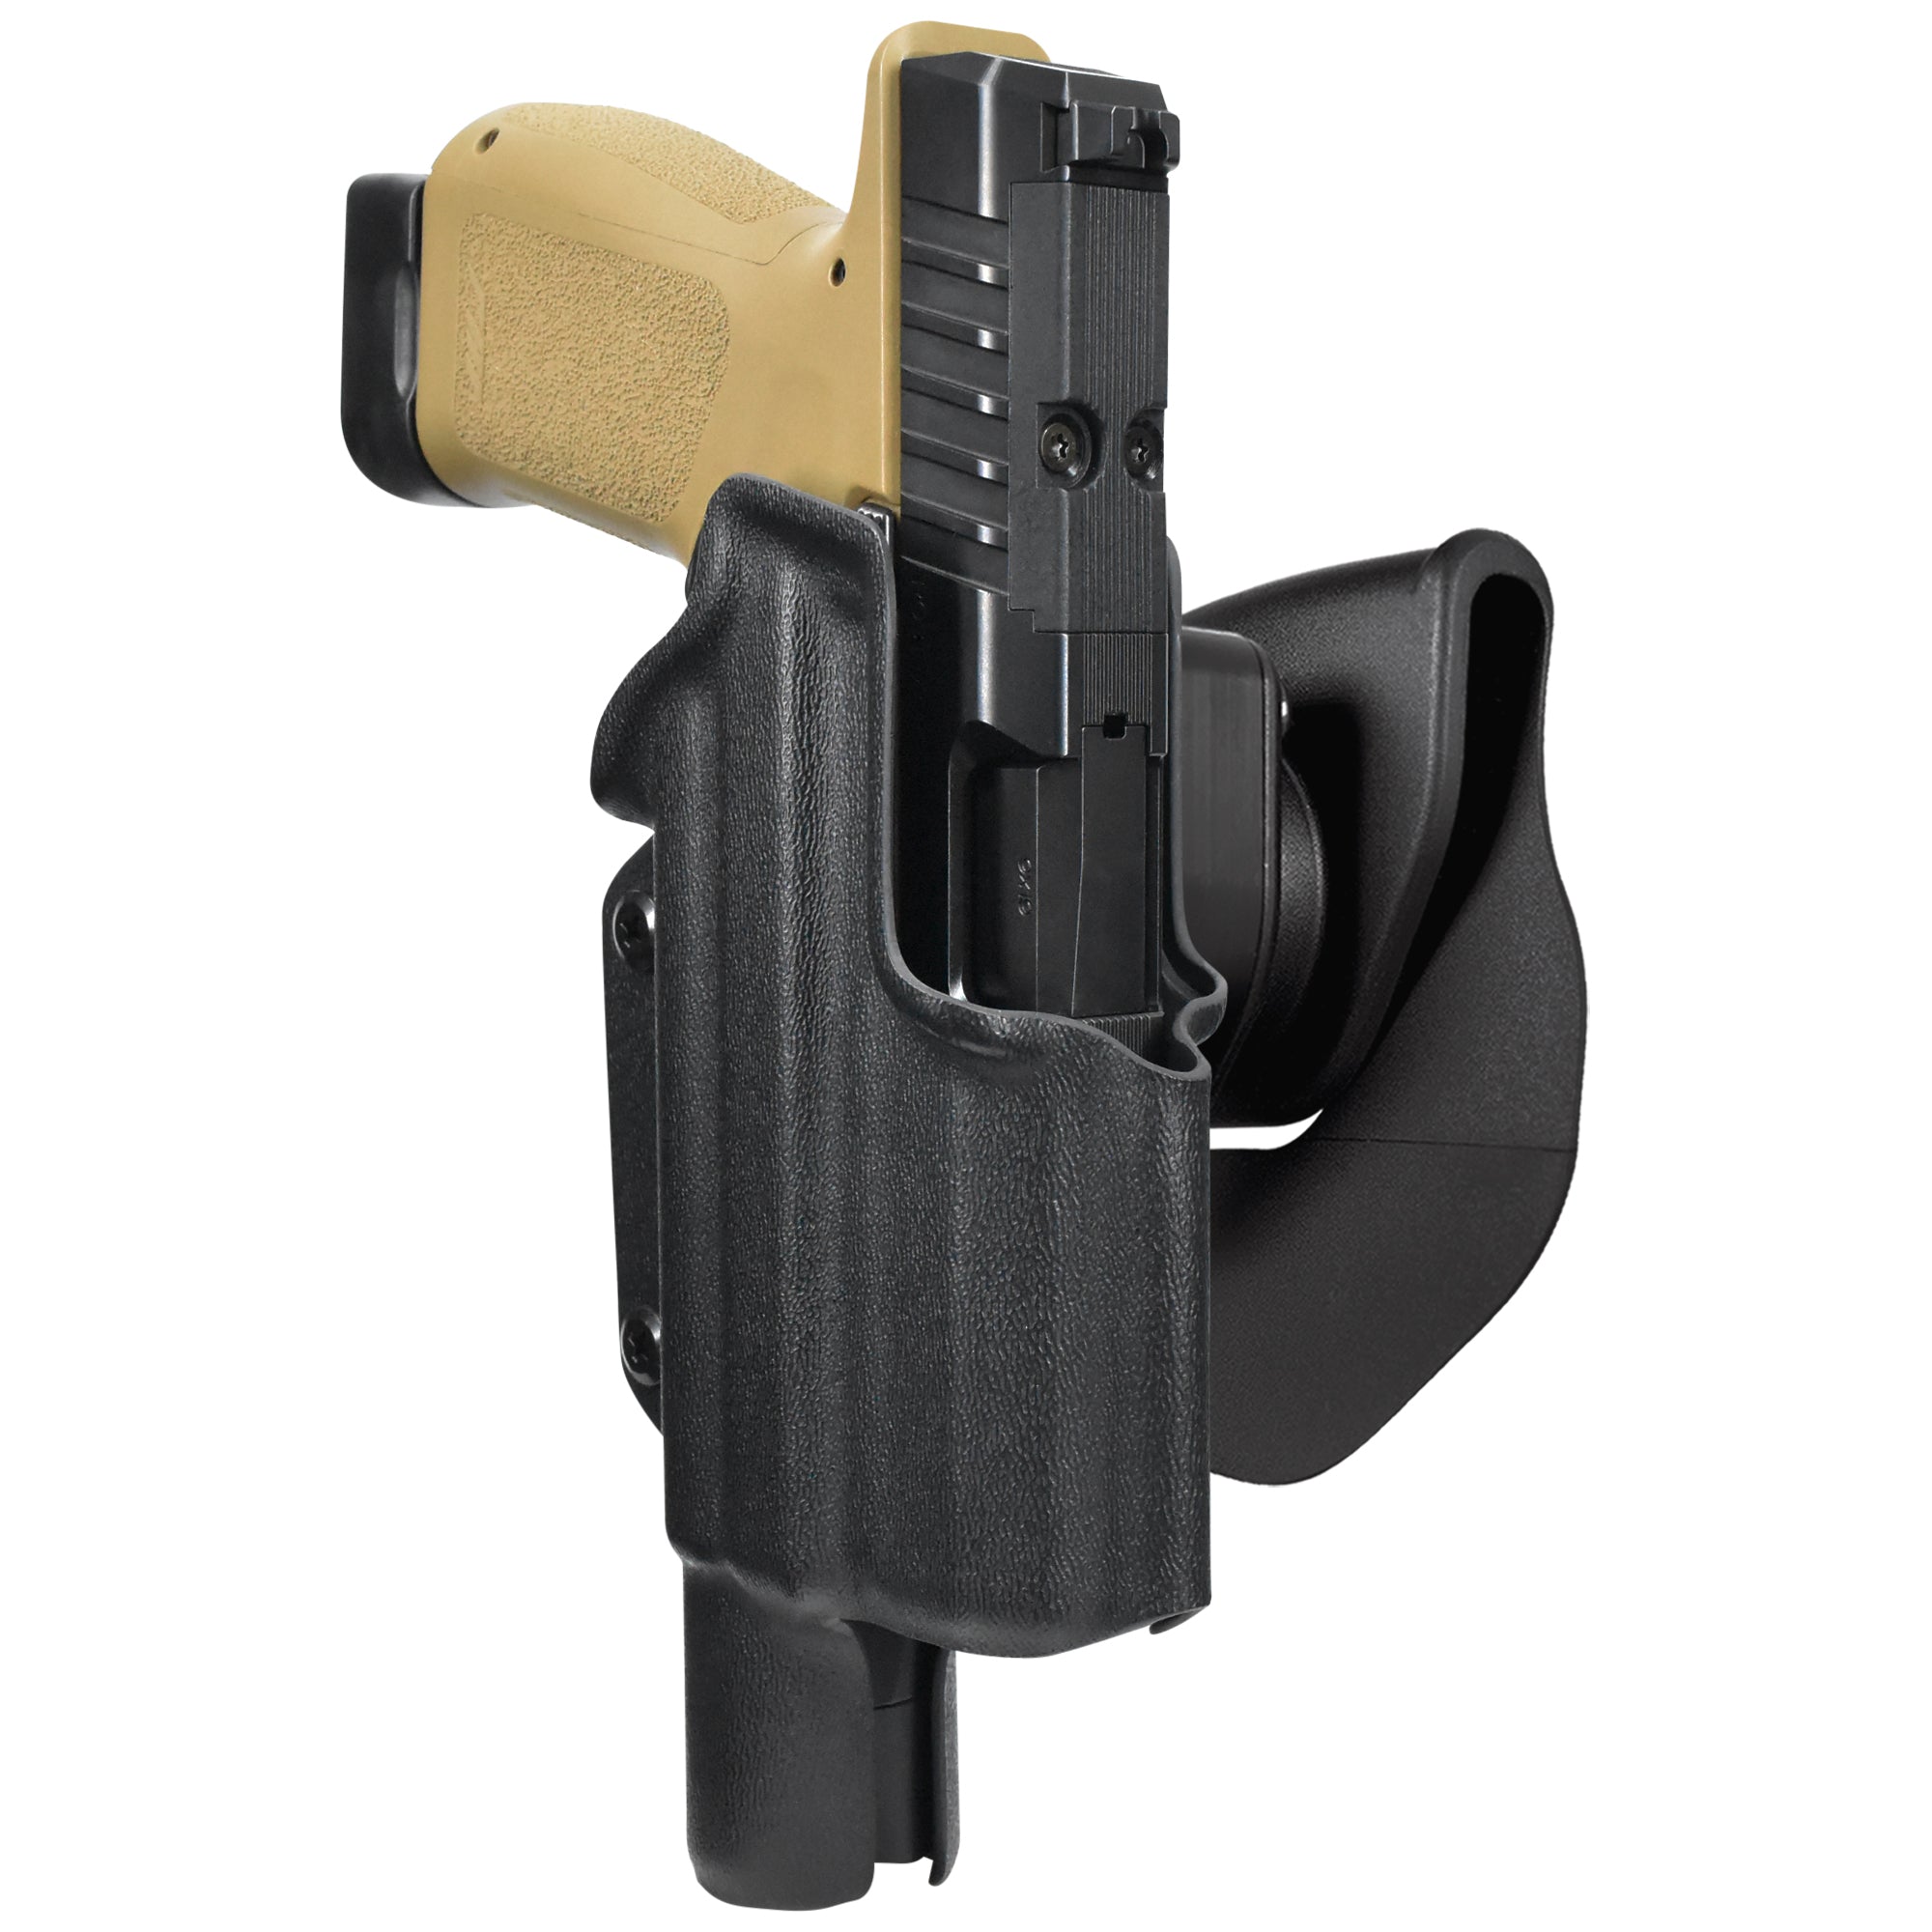 Rost Martin RM1C w/ SureFire X300U-A OWB Quick Release Paddle Holster in Black